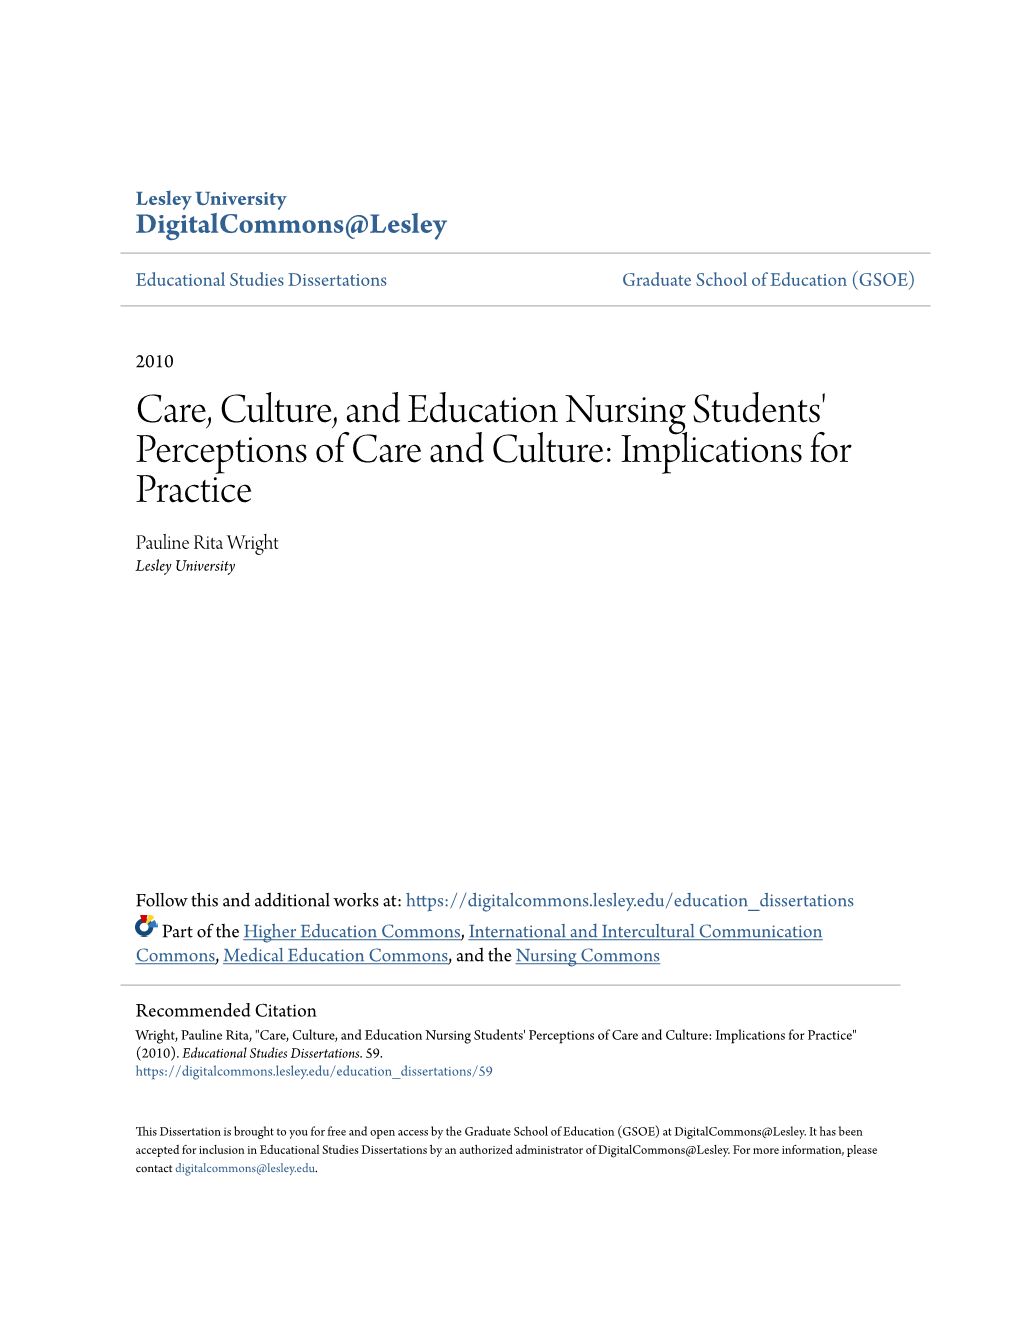 Care, Culture, and Education Nursing Students' Perceptions of Care and Culture: Implications for Practice Pauline Rita Wright Lesley University